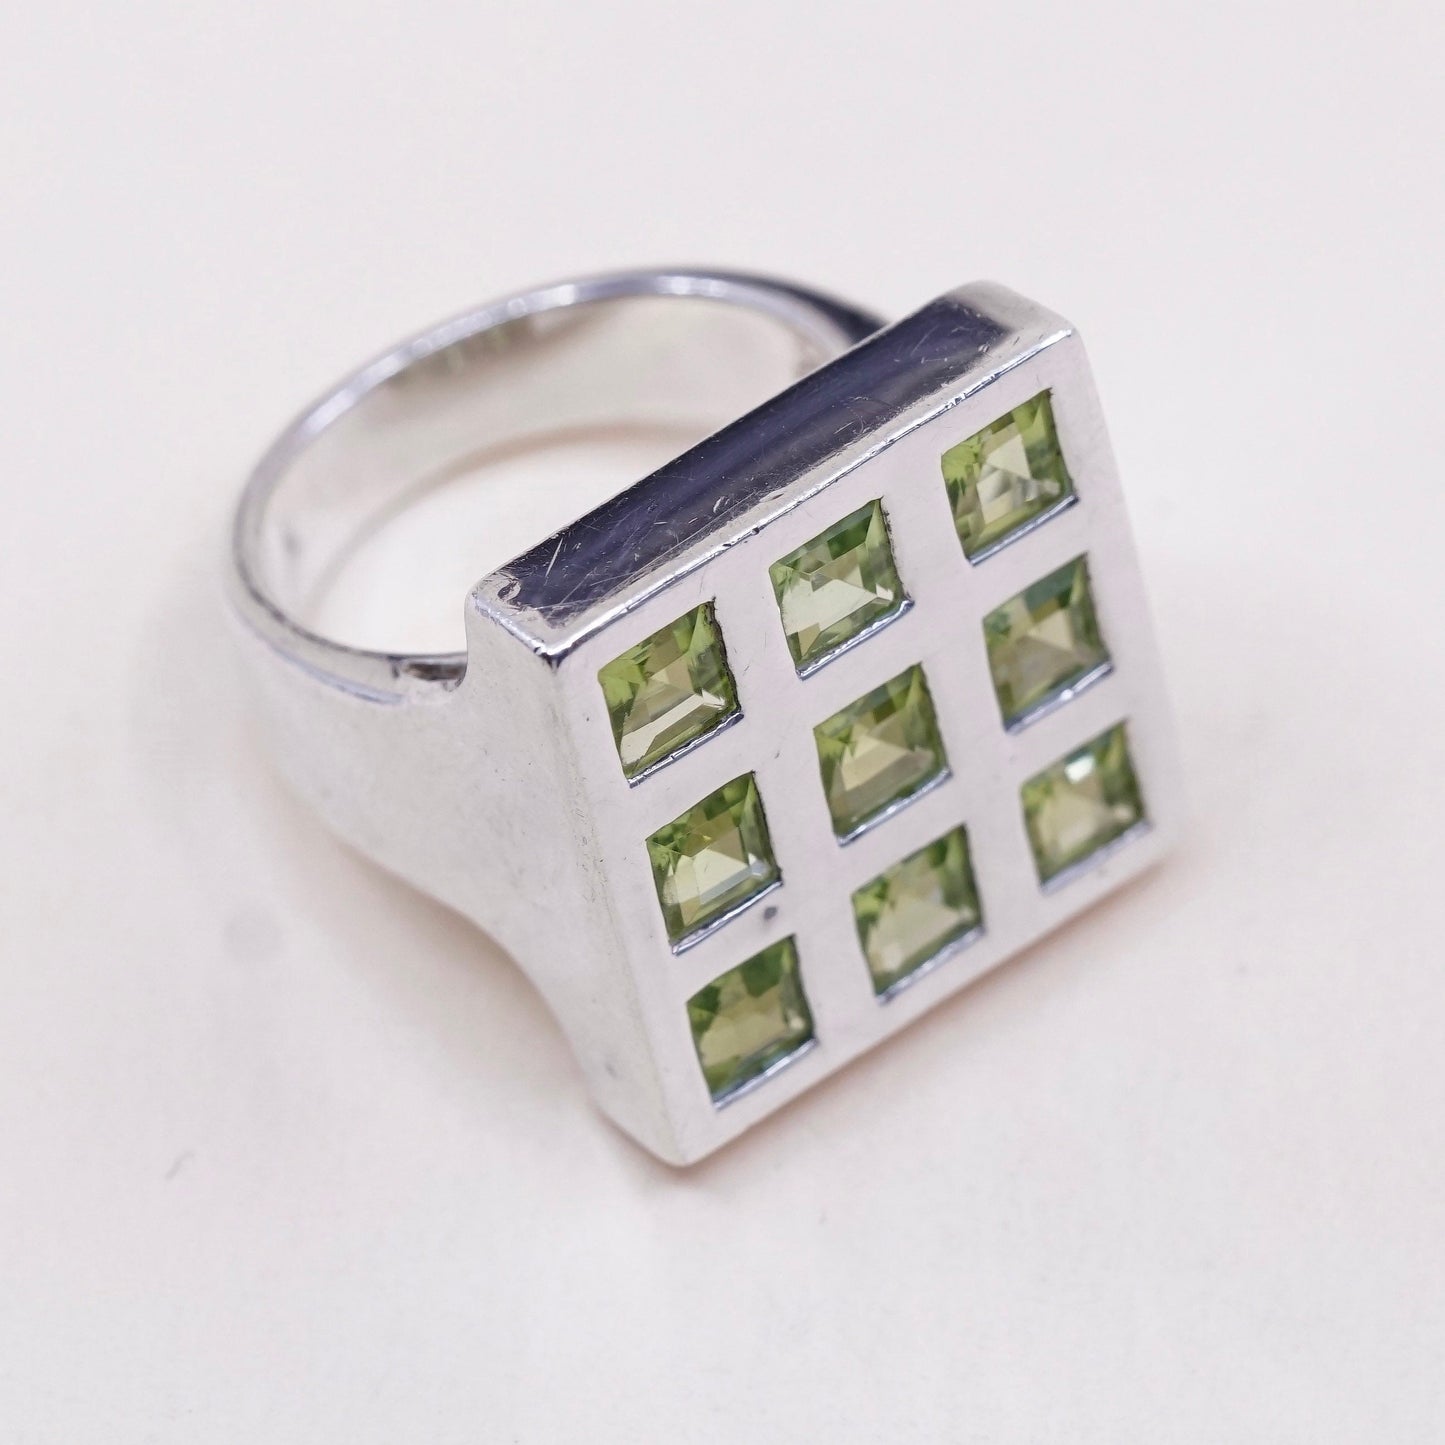 Size 7, Vintage GD mega shiny sterling 925 silver handmade ring with peridot